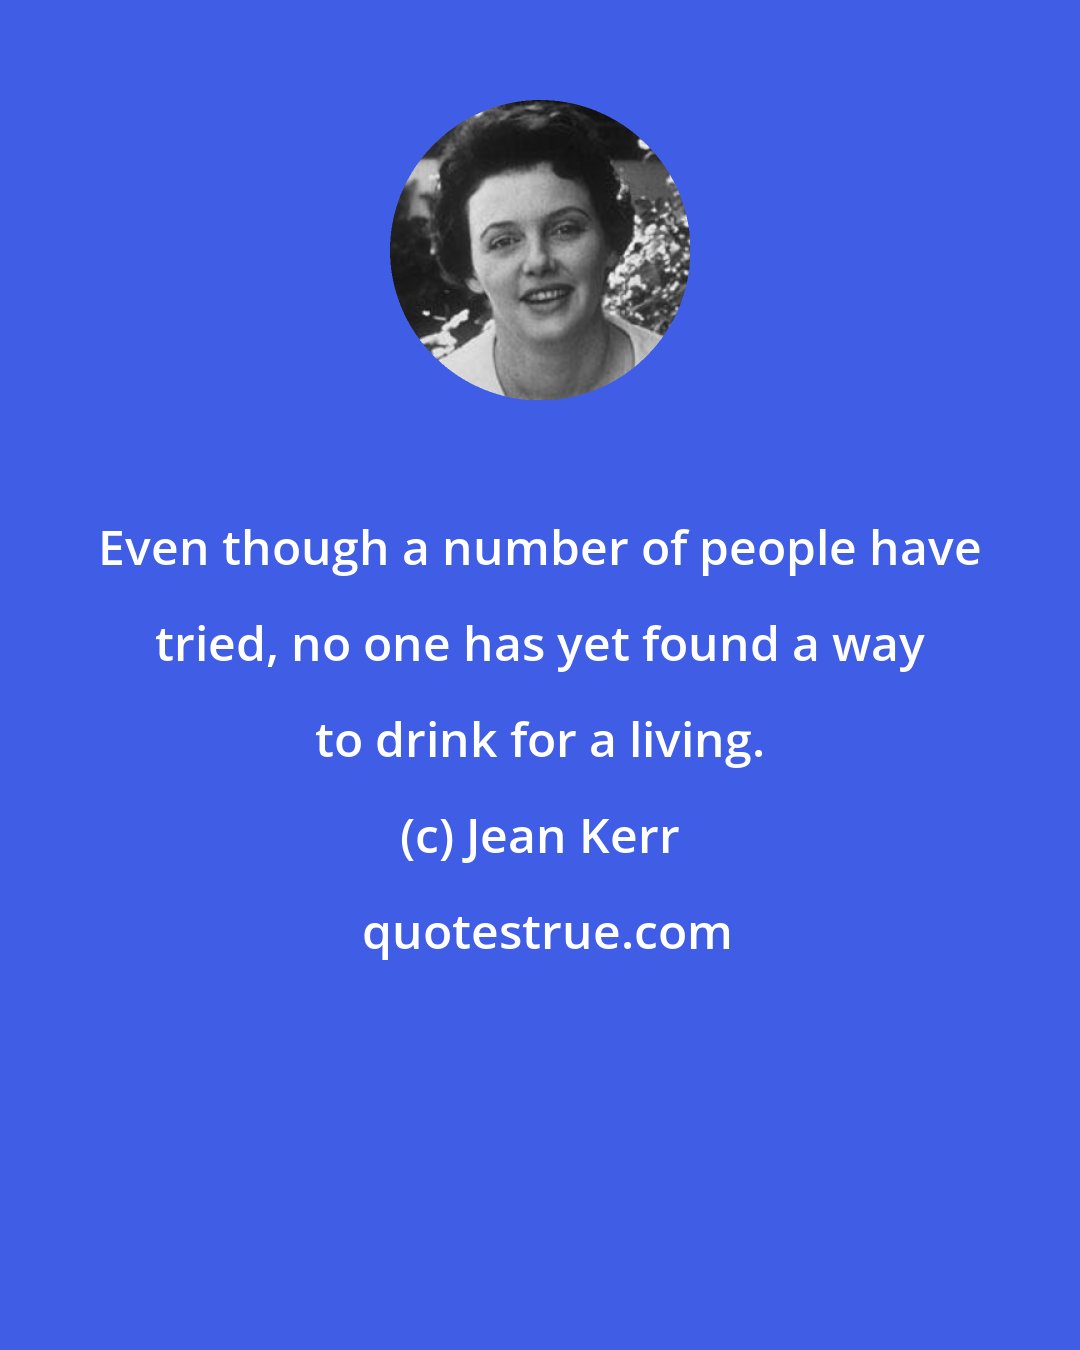 Jean Kerr: Even though a number of people have tried, no one has yet found a way to drink for a living.